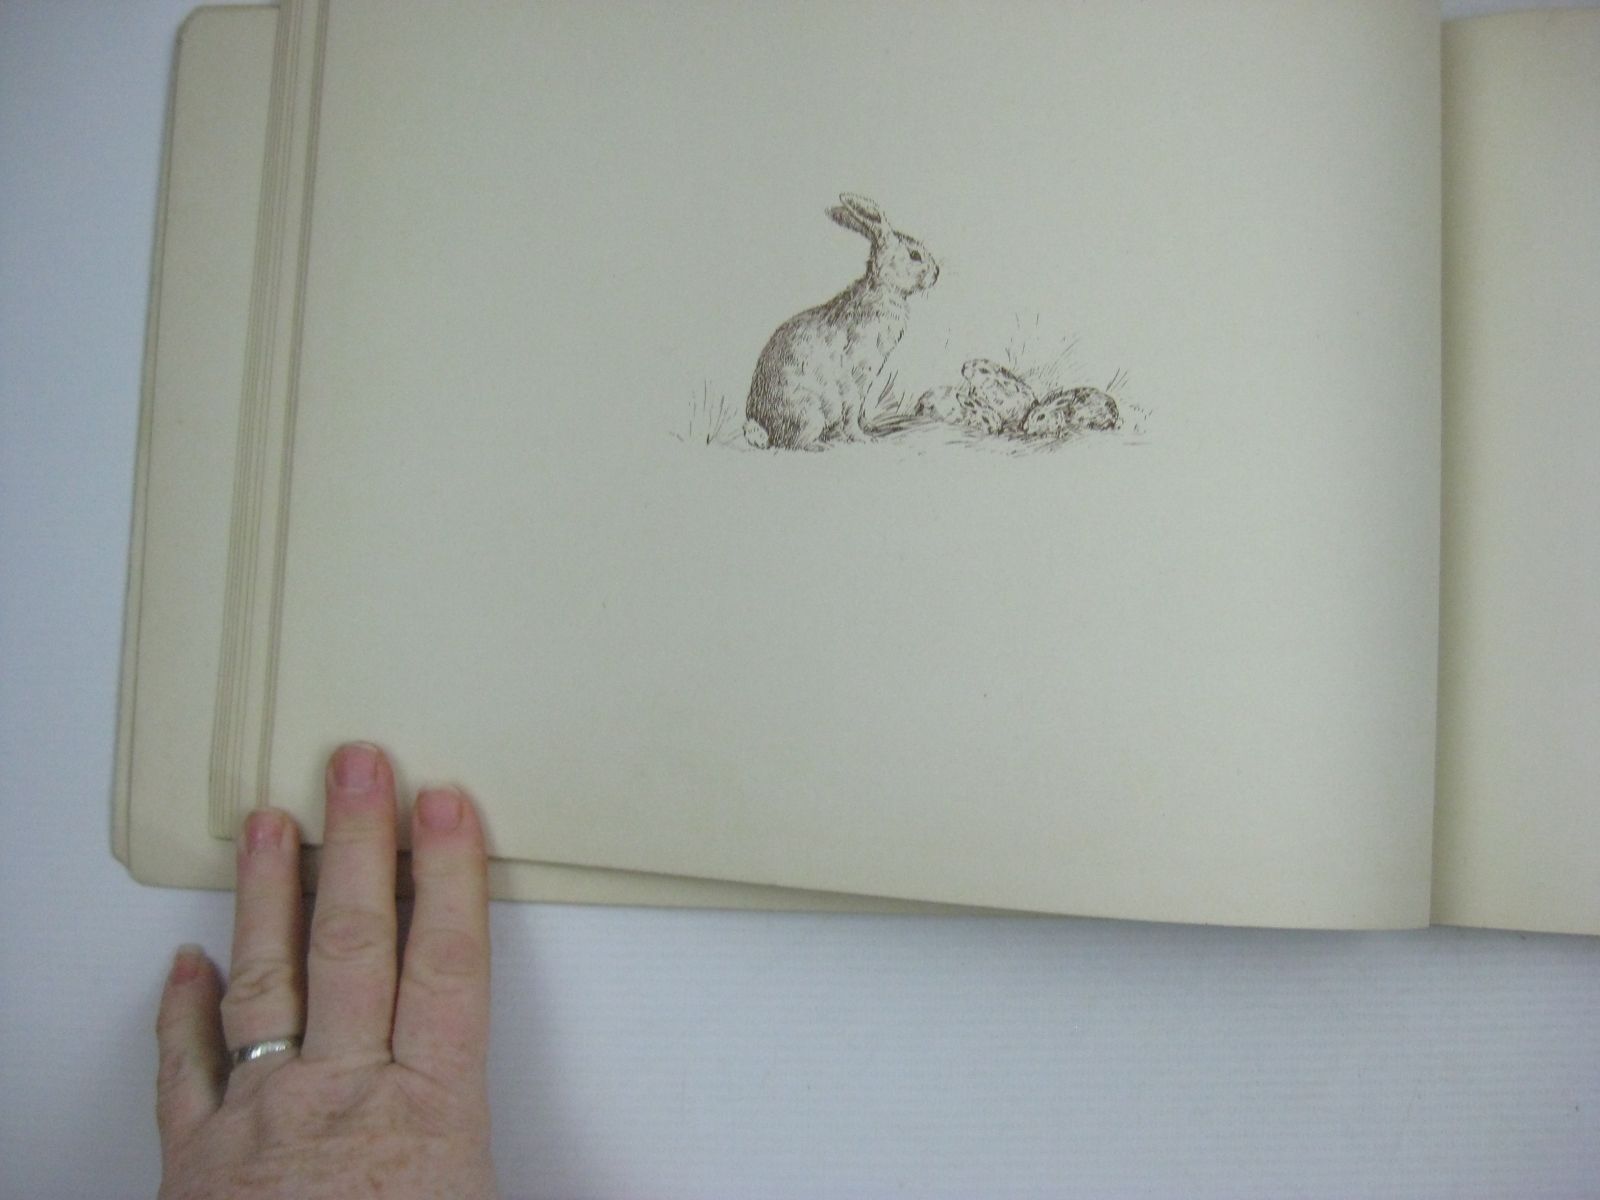 Photo of THE HOLE AND CORNER BOOK written by Parker, B. illustrated by Parker, N. published by W. & R. Chambers (STOCK CODE: 1404293)  for sale by Stella & Rose's Books